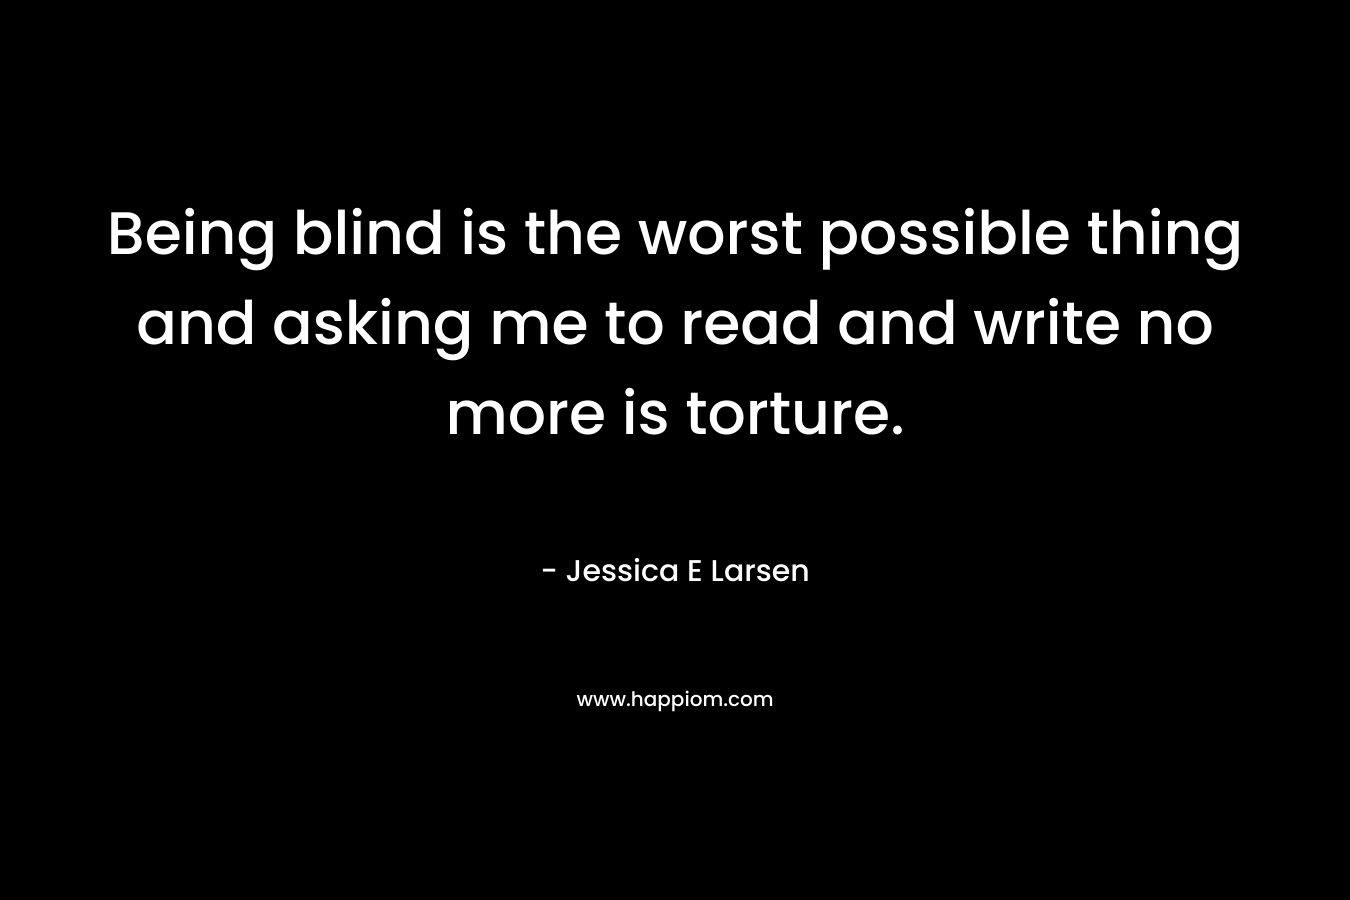 Being blind is the worst possible thing and asking me to read and write no more is torture. – Jessica E Larsen